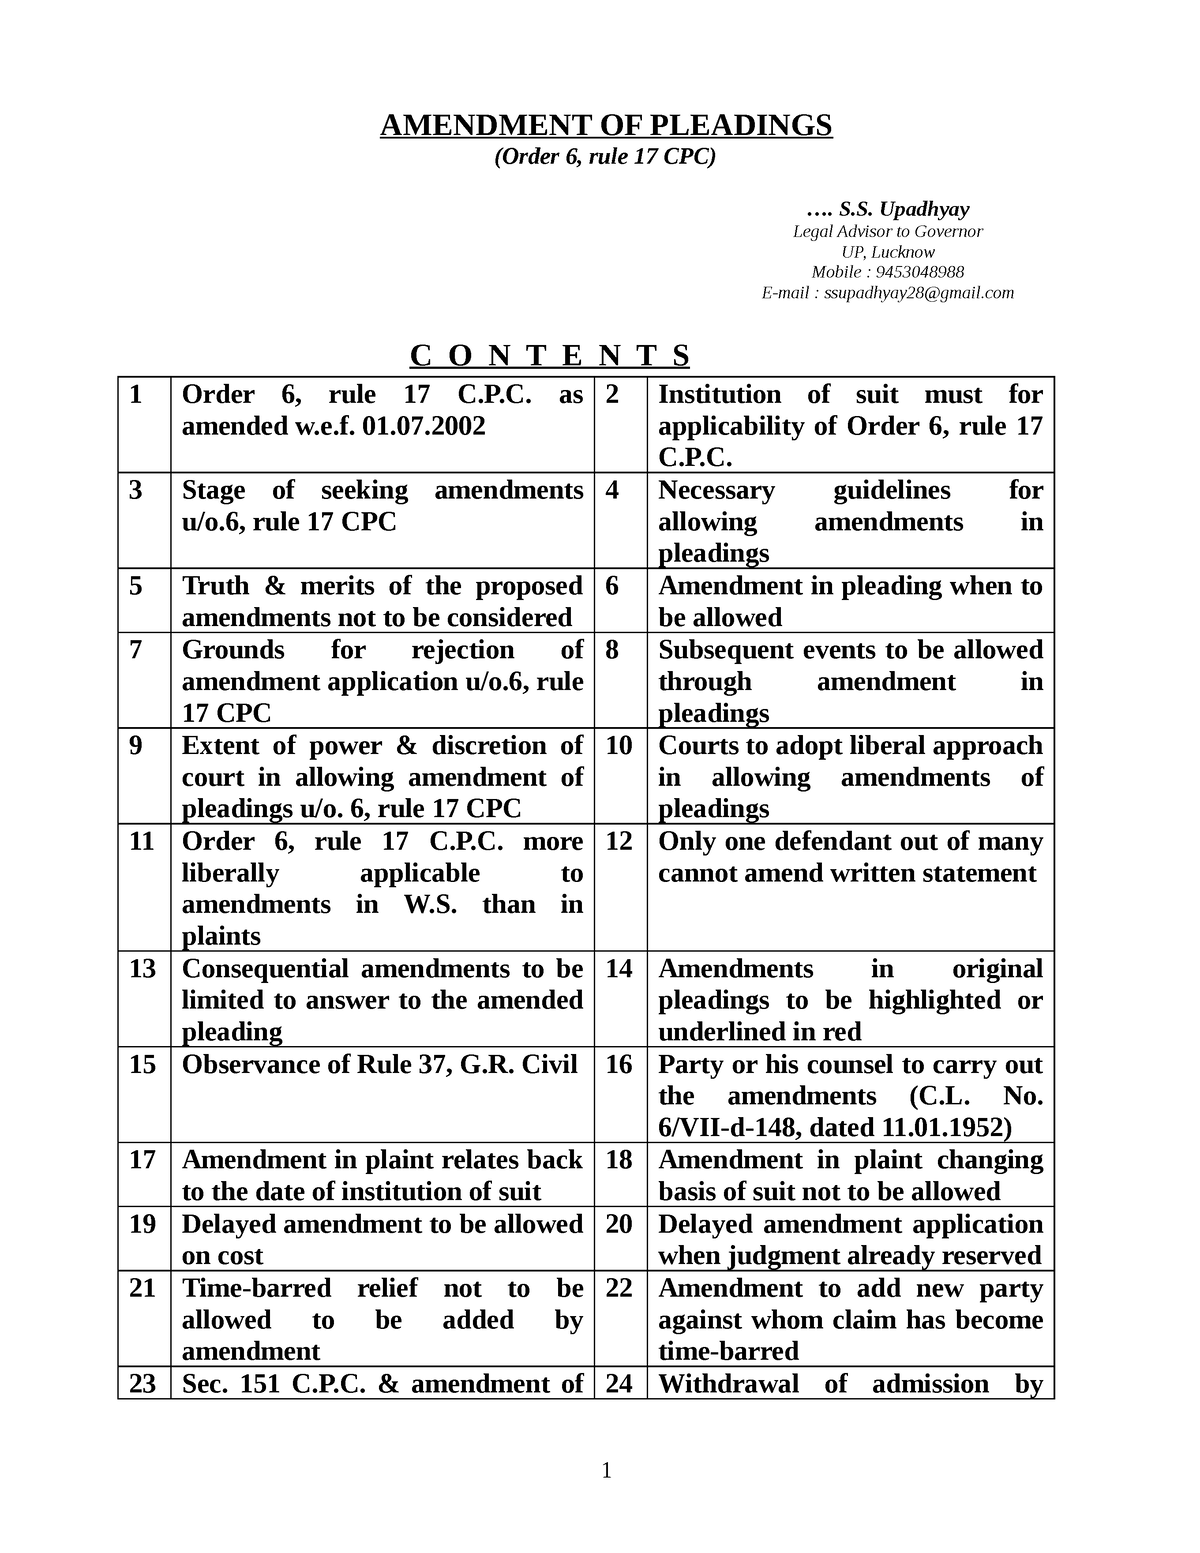 Amendment Of Pleadings Amendment Of Pleadings Order 6 Rule 17 Cpc S Upadhyay Legal